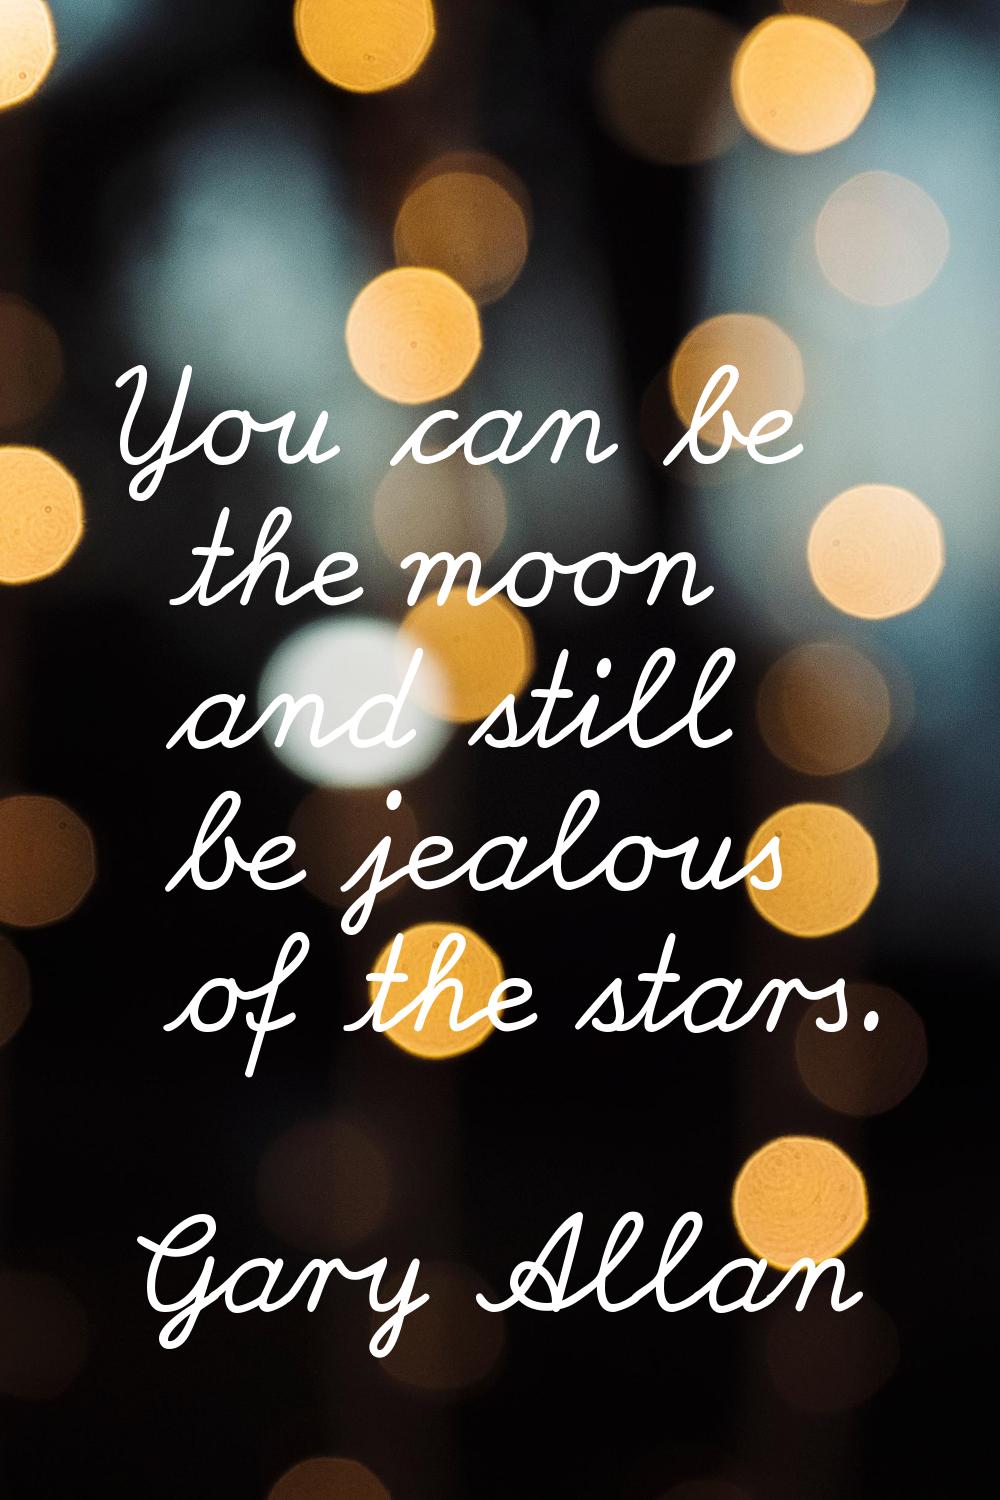 You can be the moon and still be jealous of the stars.